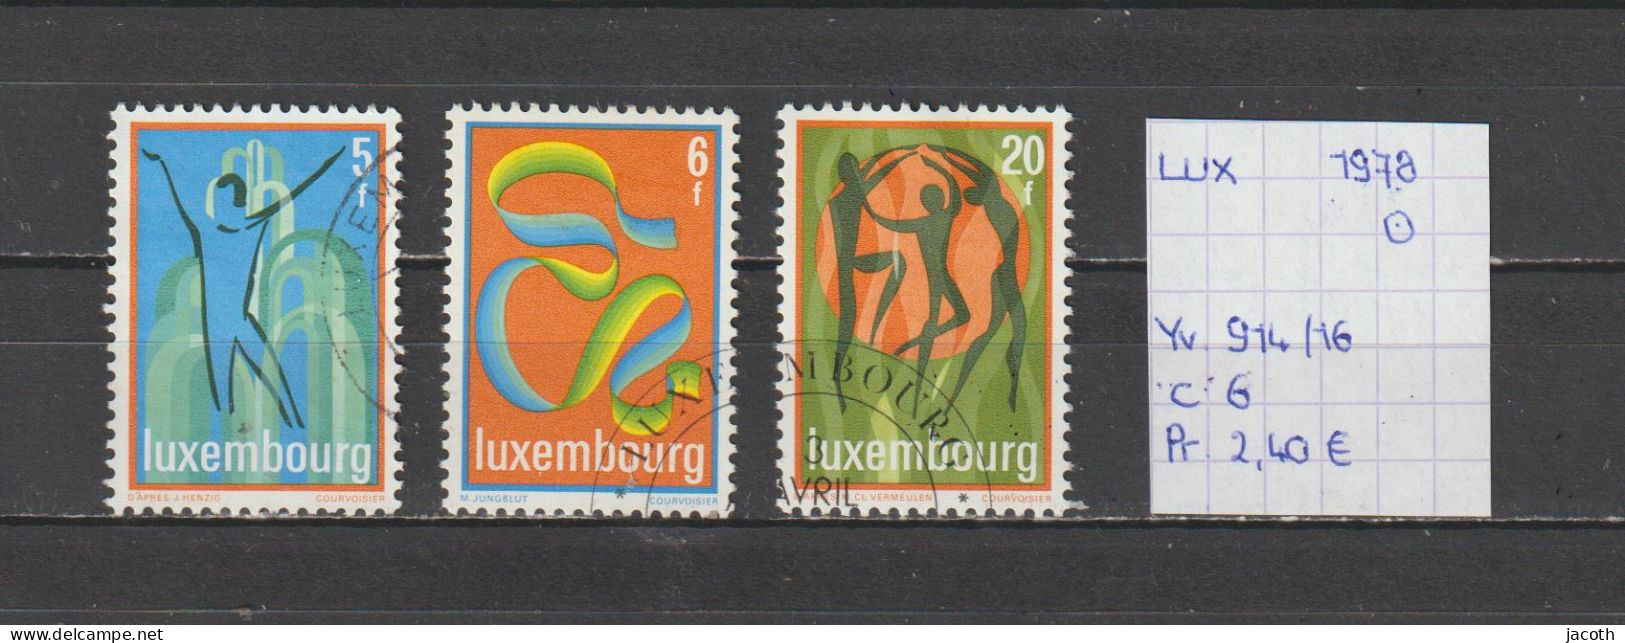 (TJ) Luxembourg 1978 - YT 914/16 (gest./obl./used) - Gebraucht